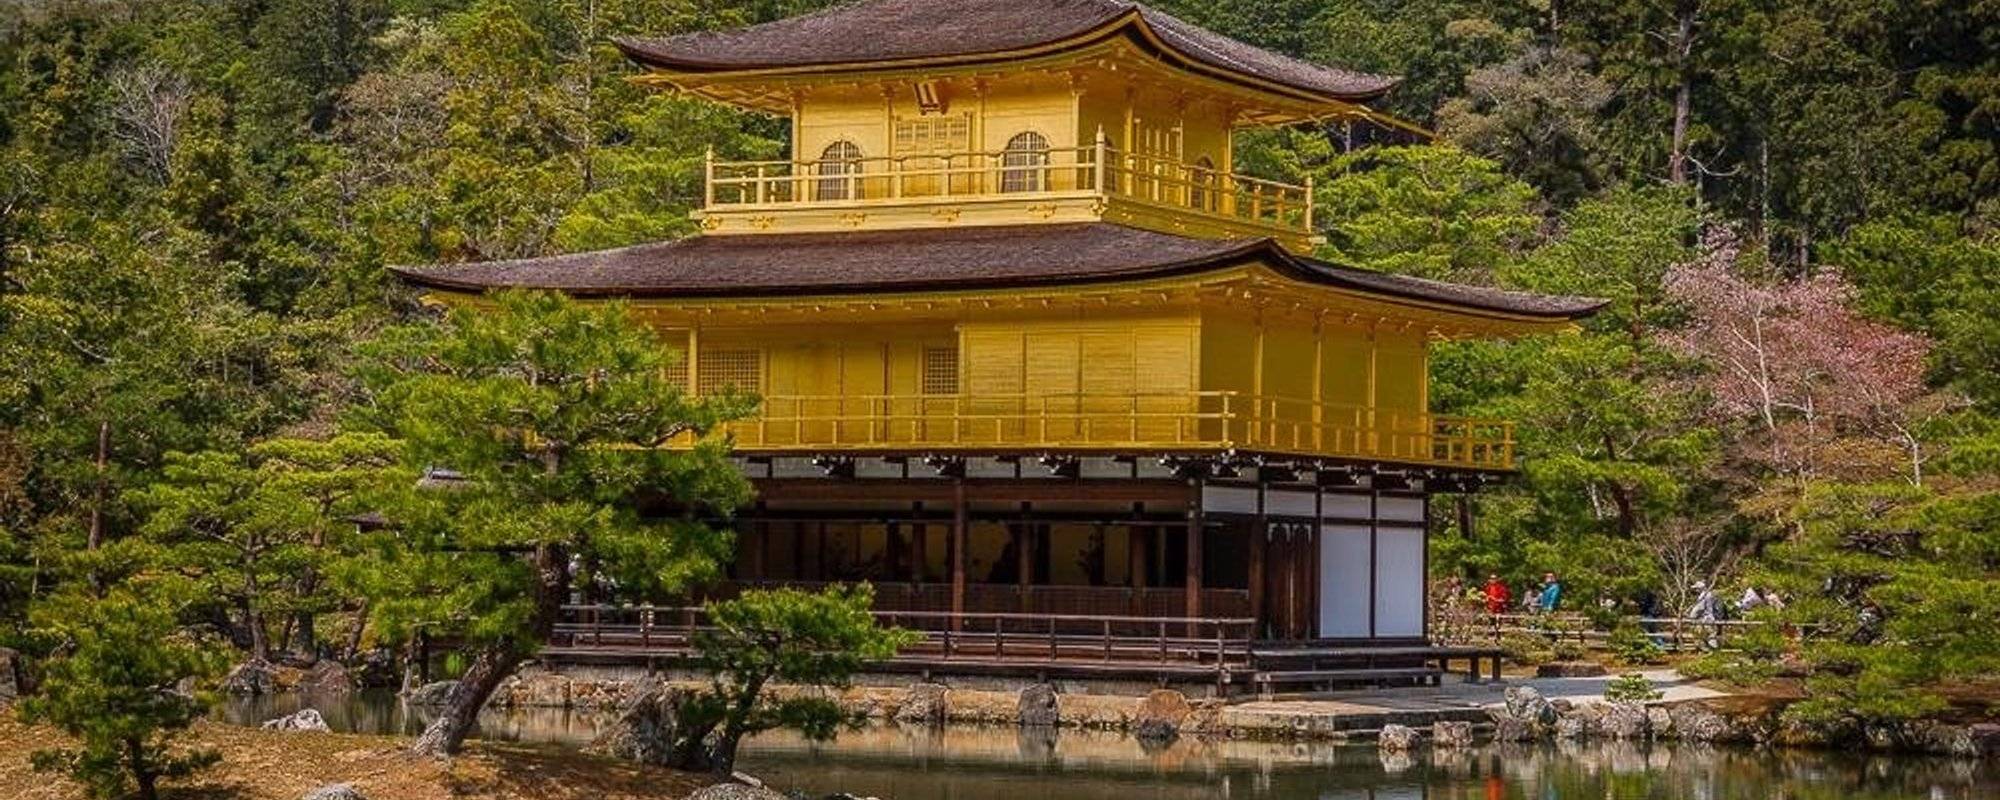 Oldie but Goldie, literally - The Golden Pavilion, Kyoto, Japan - The 200 SBD 7 World's Continents Photo Challenge, by @czechglobalhosts - Sunday - Asia